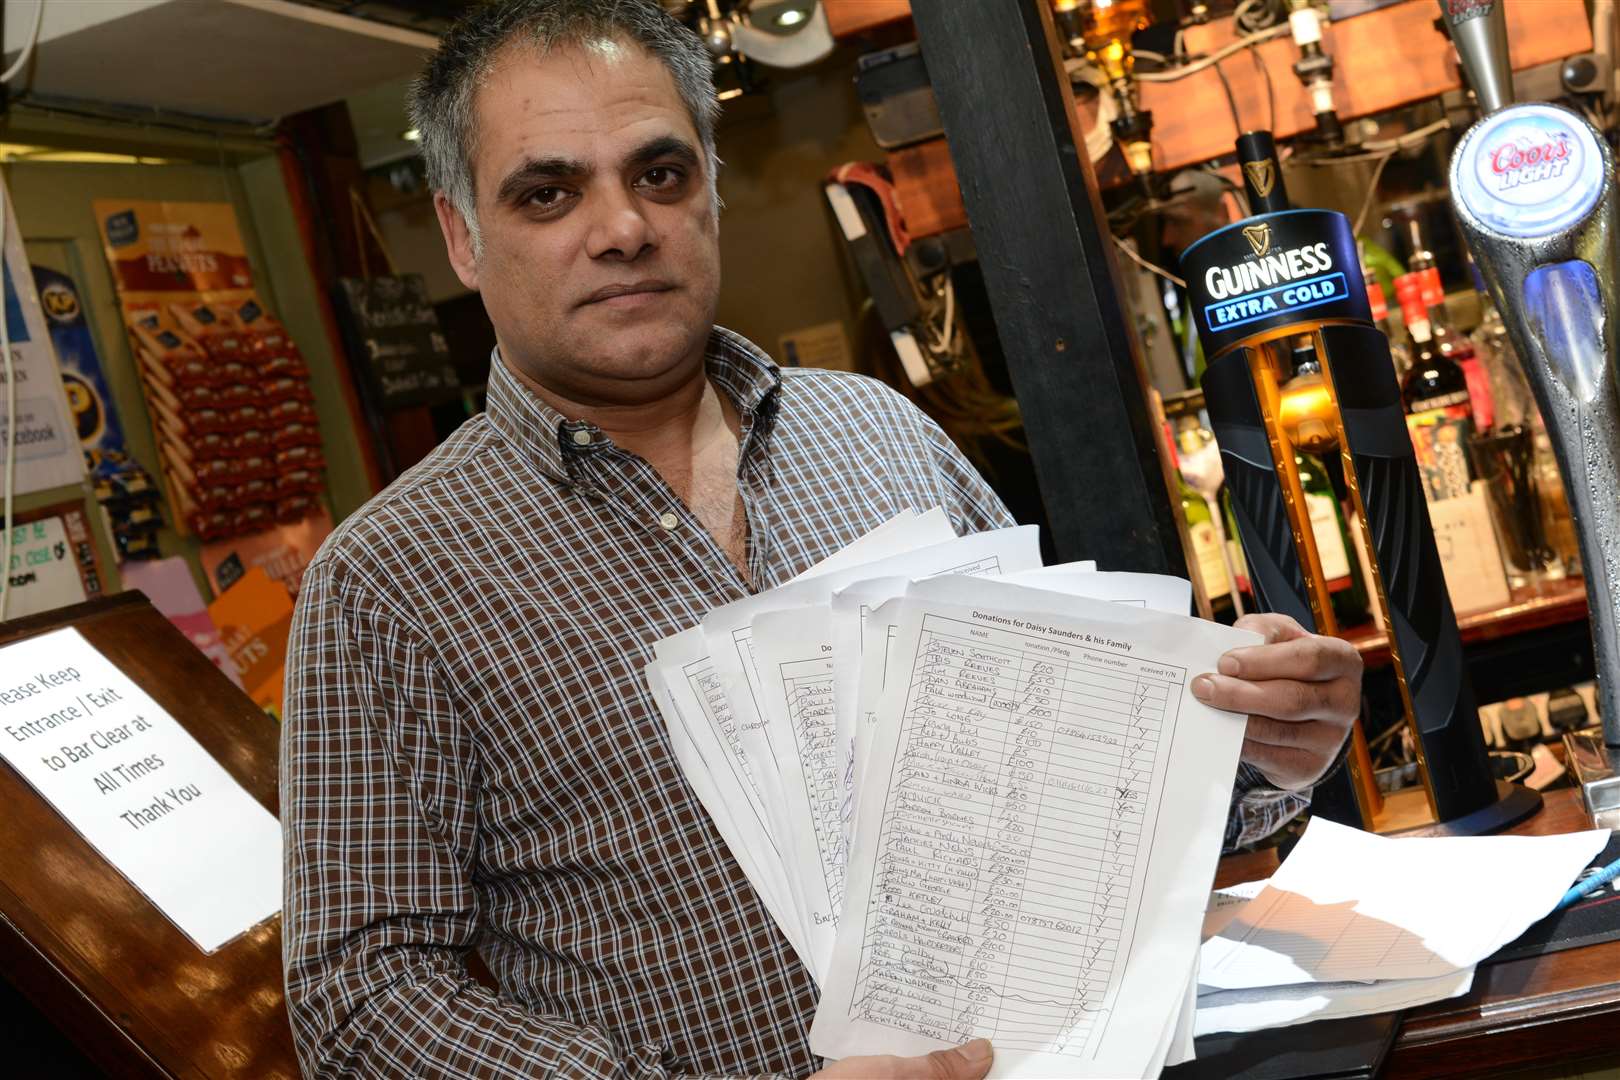 Landlord of The Crown pub, Harry Purewal